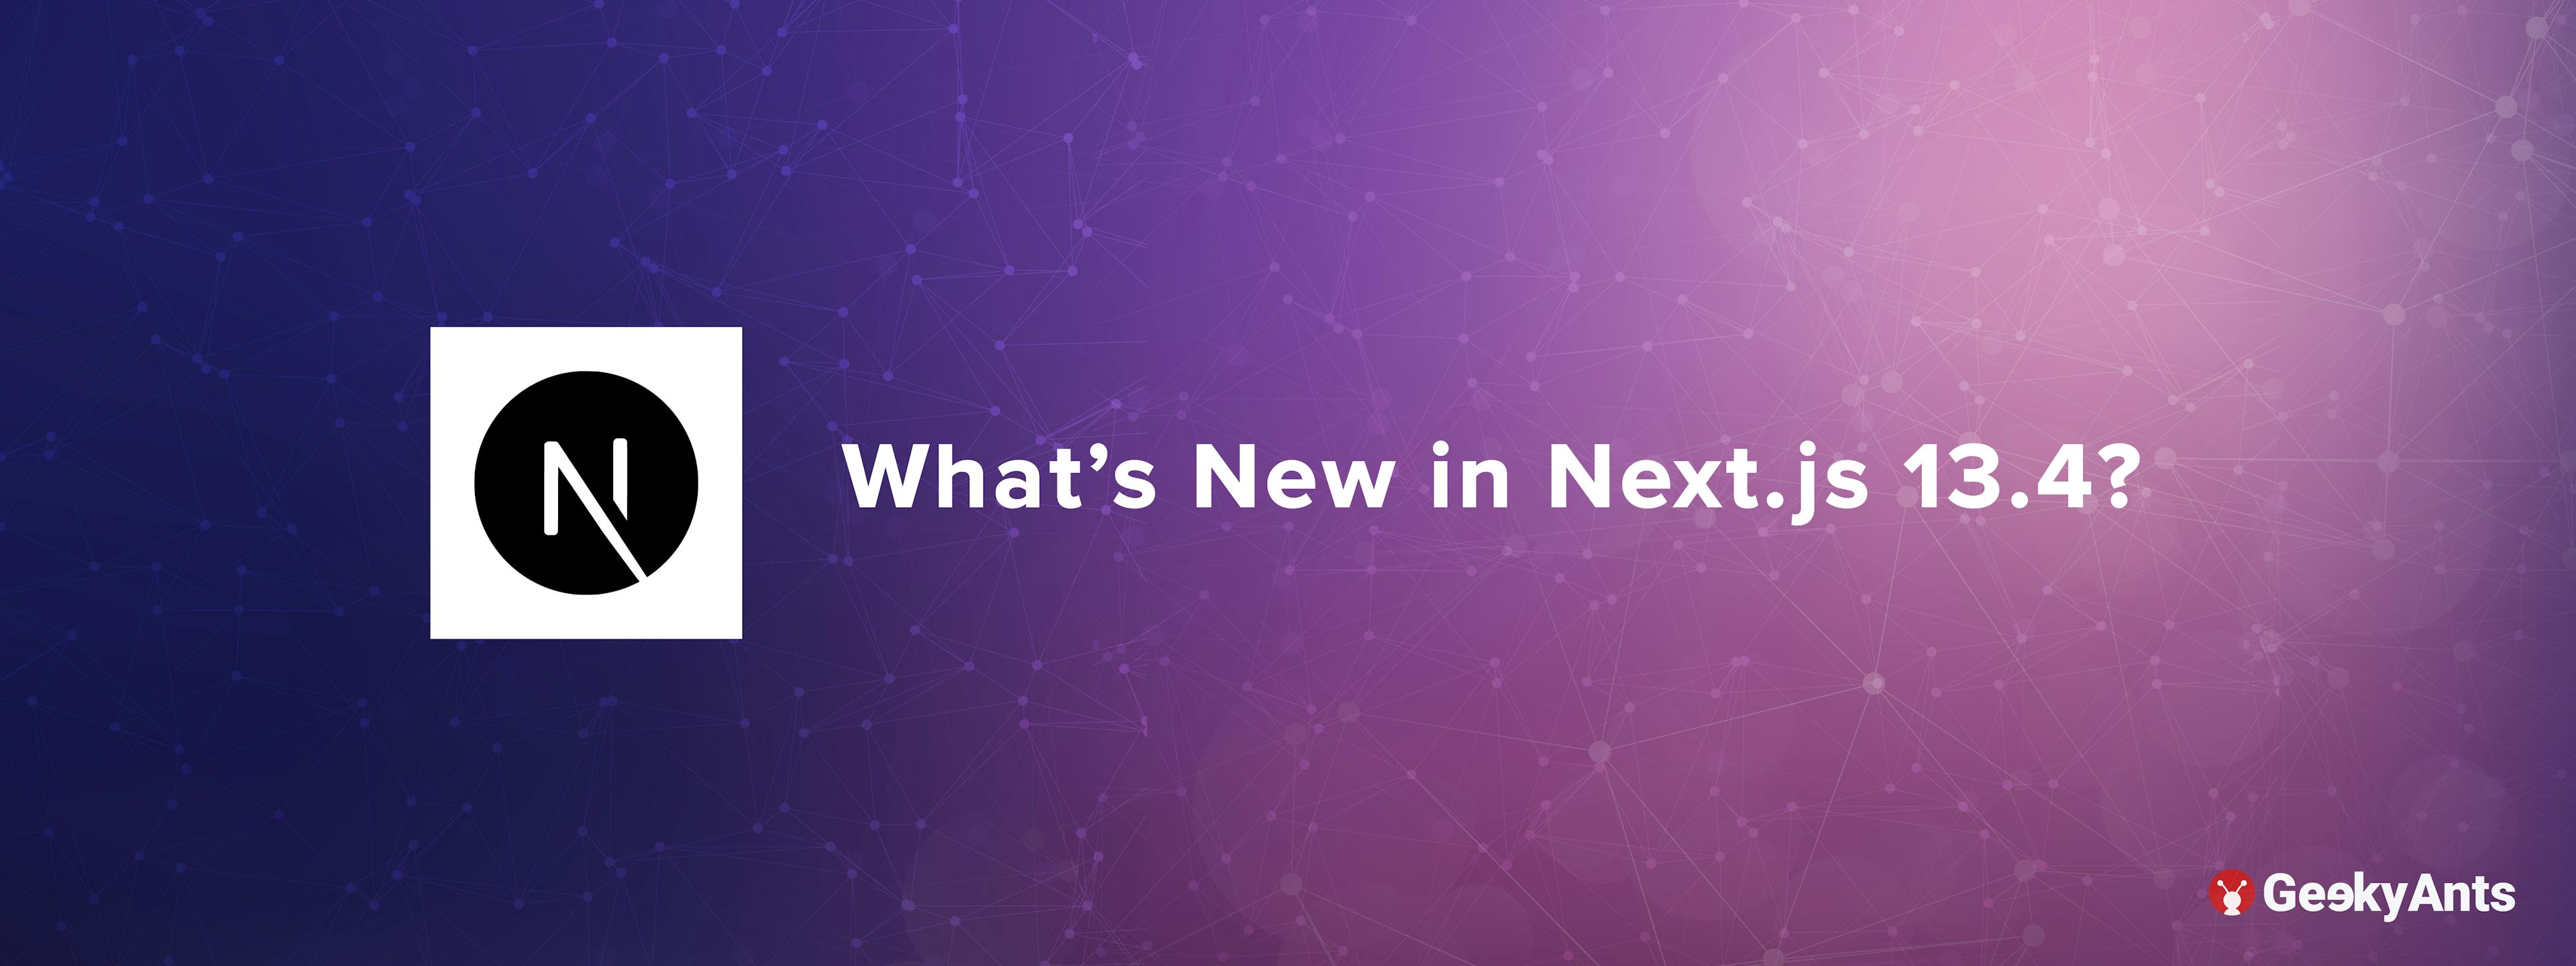 What's New in Next.js 13.4?